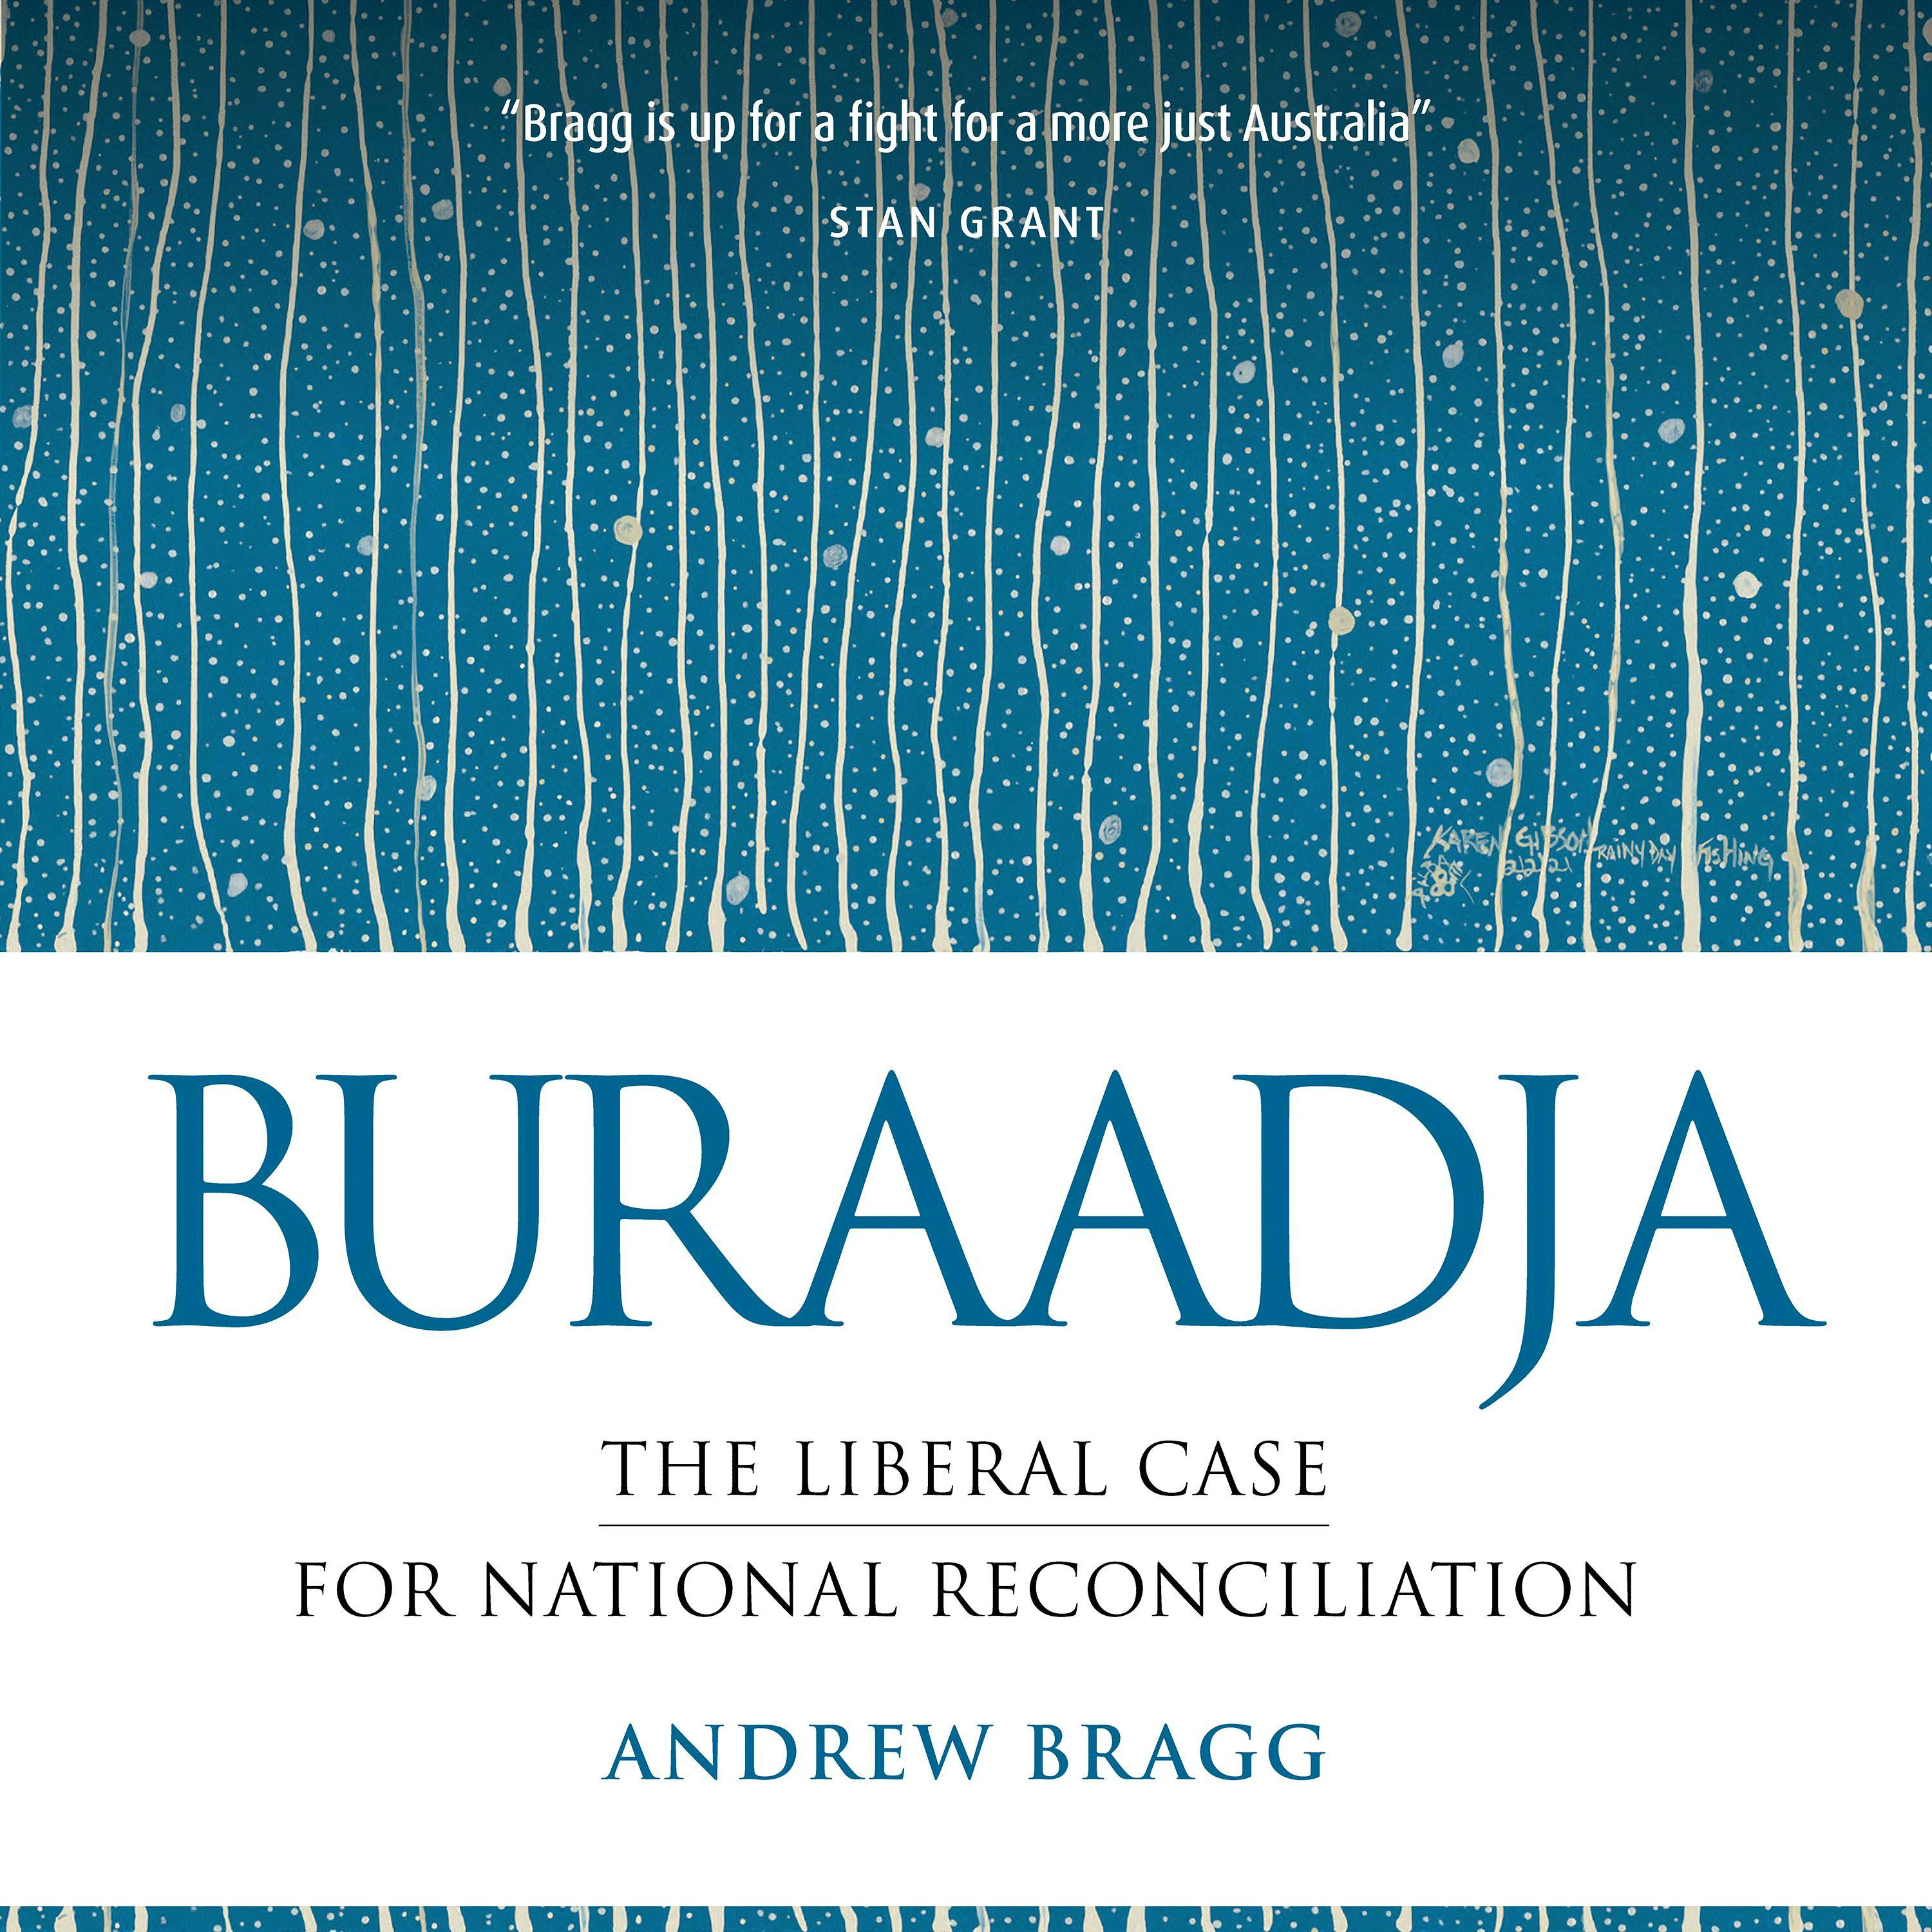 Buraadja: The liberal case for national reconciliation - Andrew Bragg